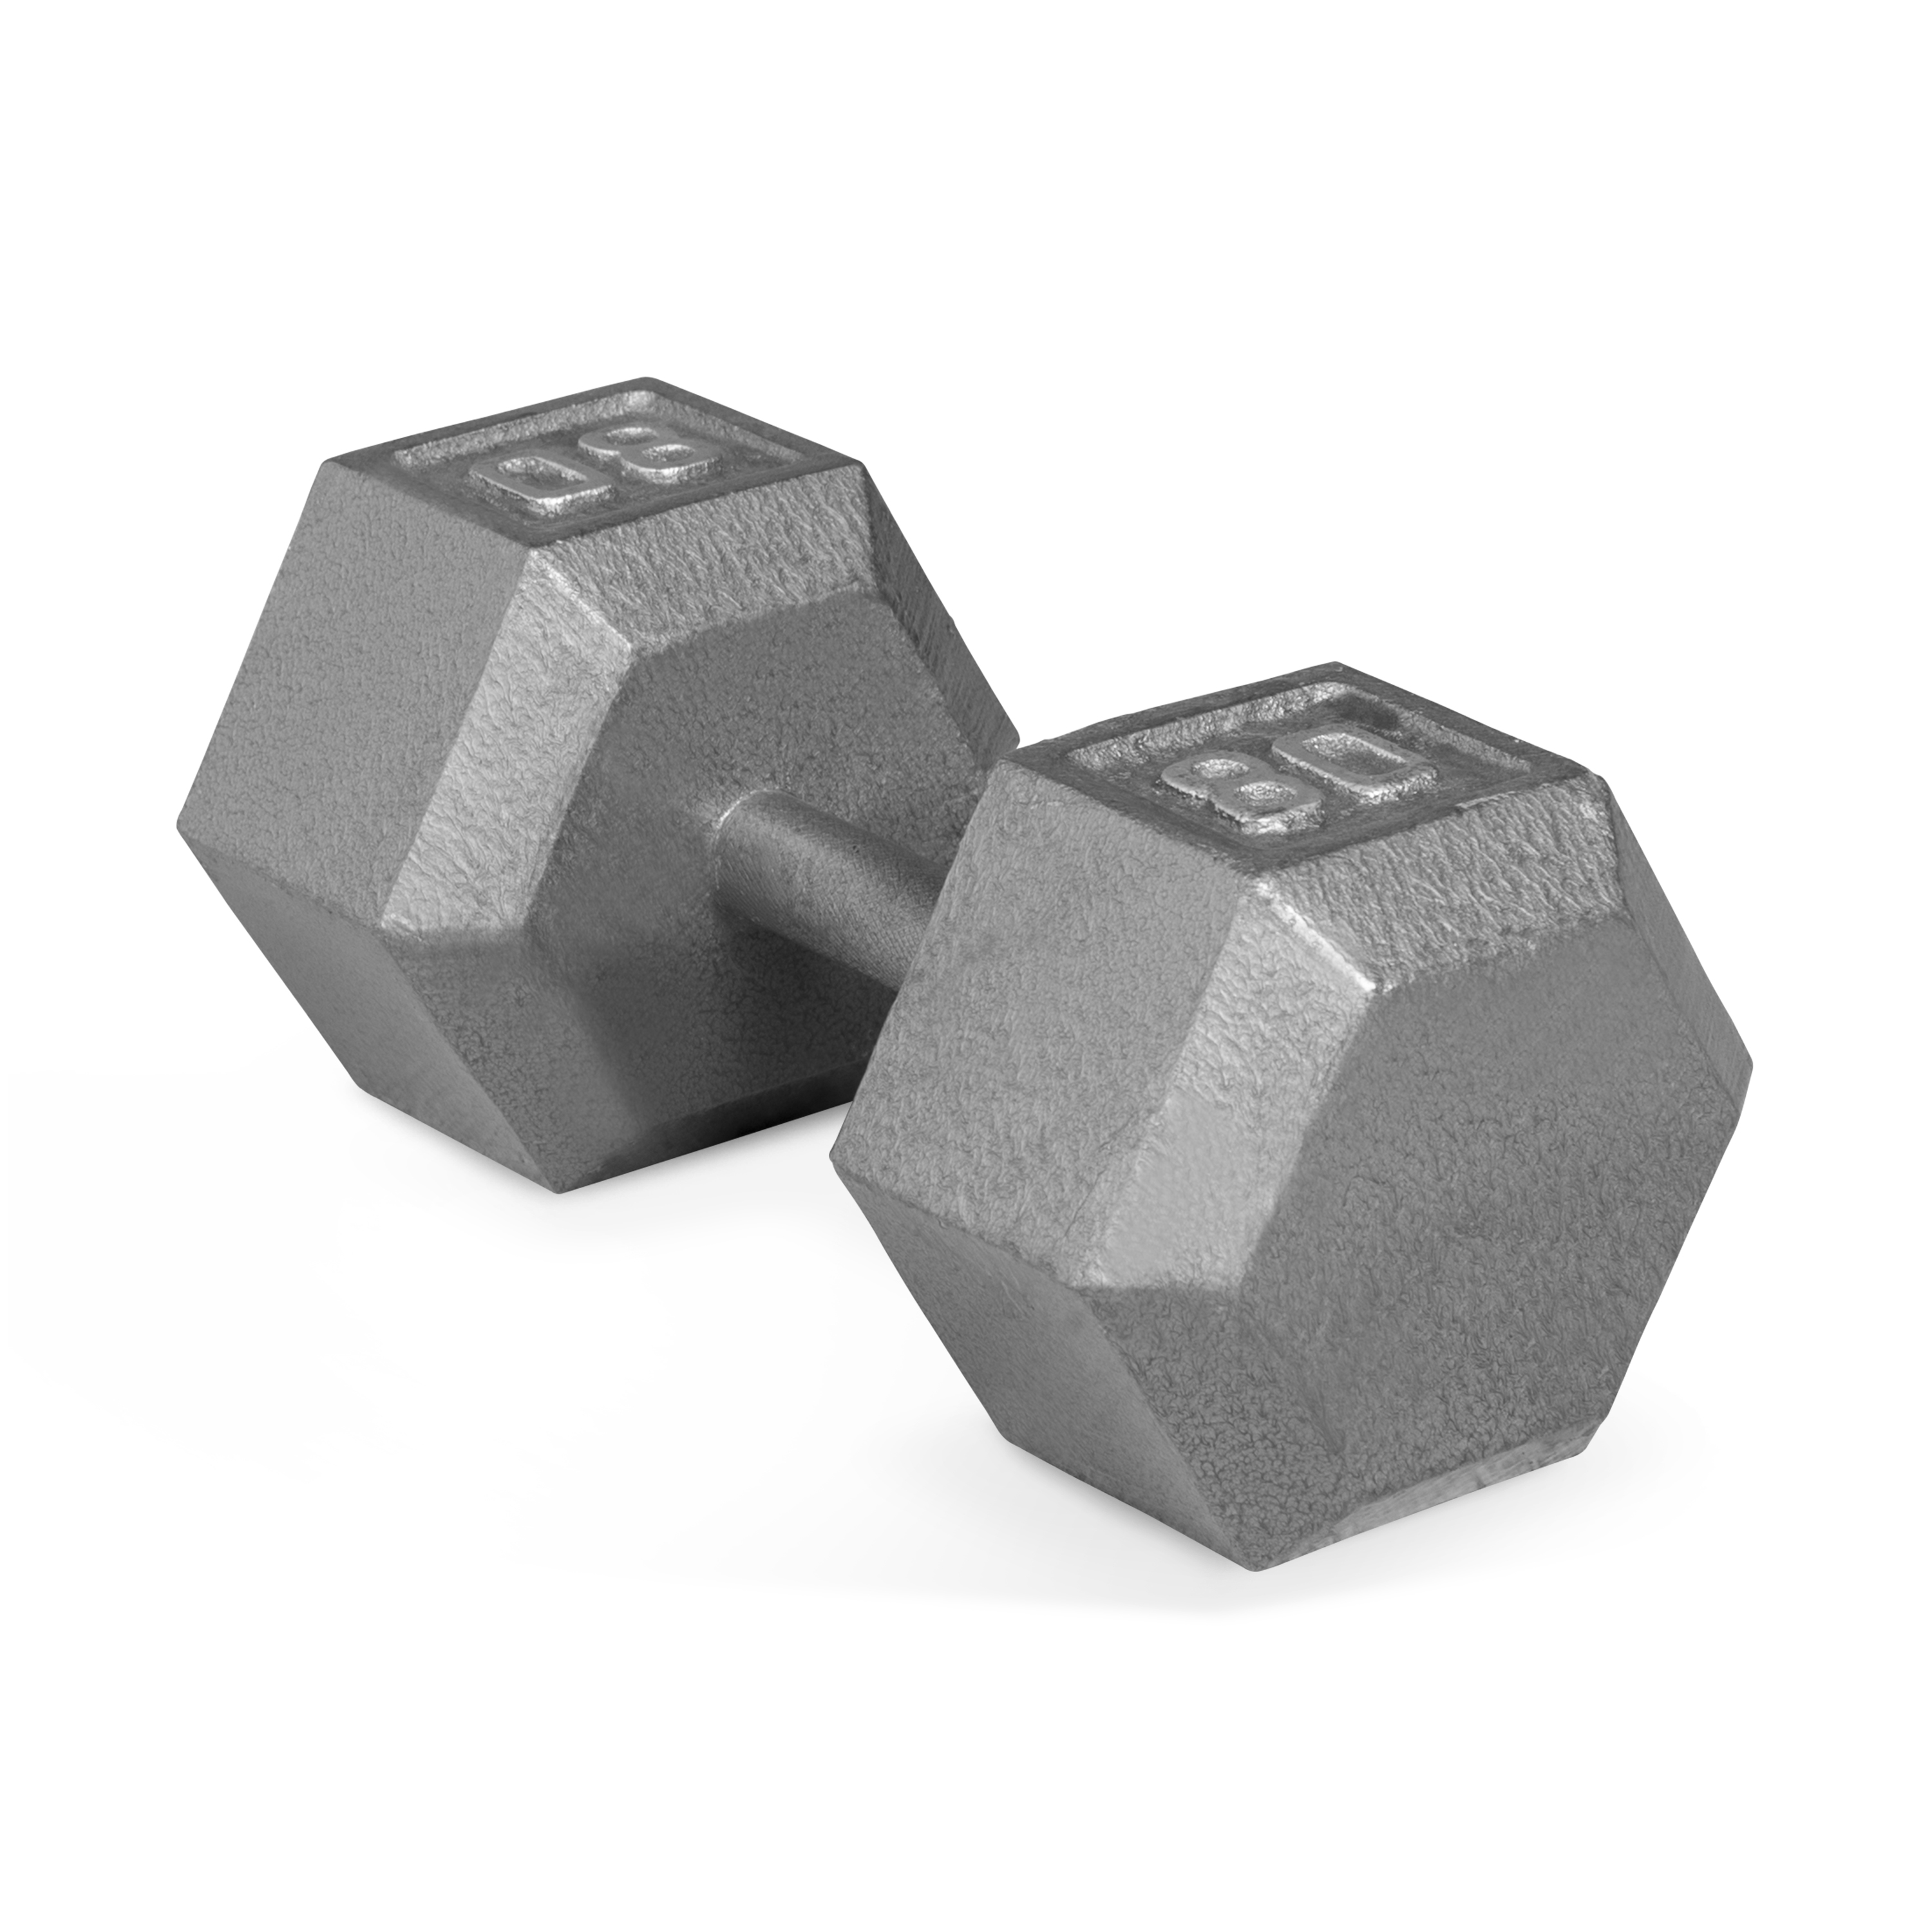 CAP Barbell 80lb Cast Iron Hex Dumbbell, Single - image 1 of 6